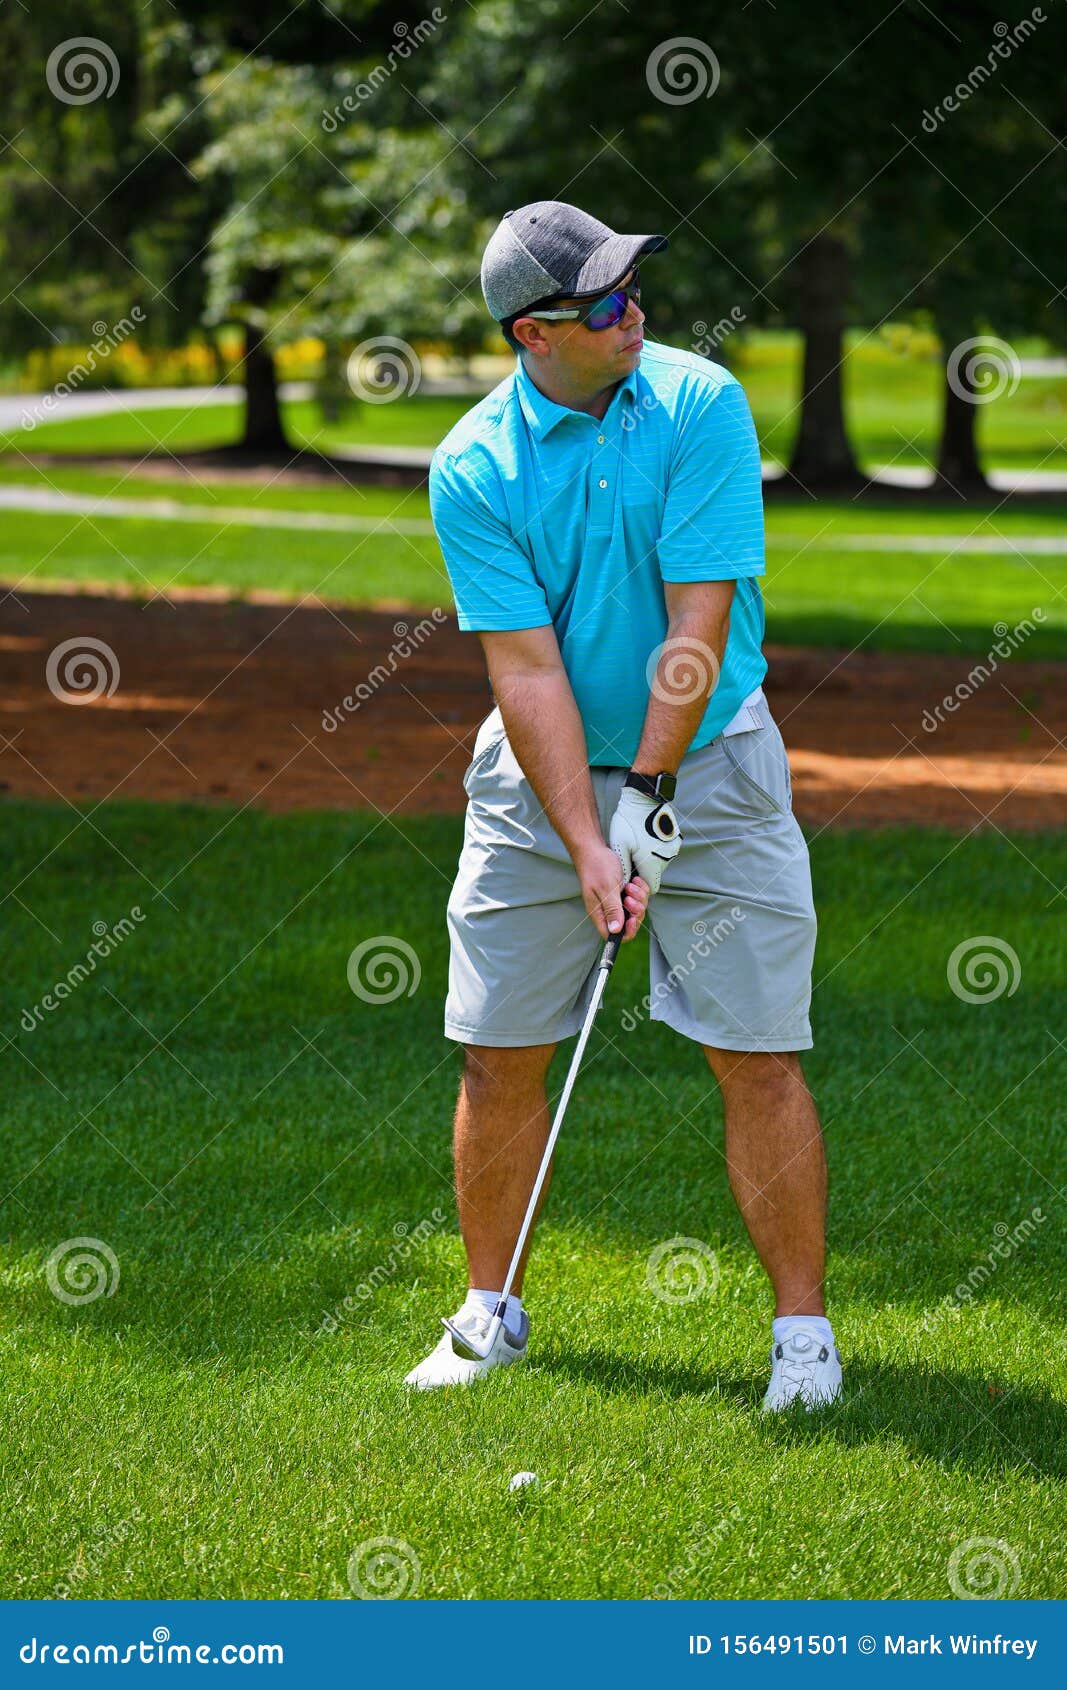 Young Man Playing a Round of Golf Stock Image - Image of healthy, play ...